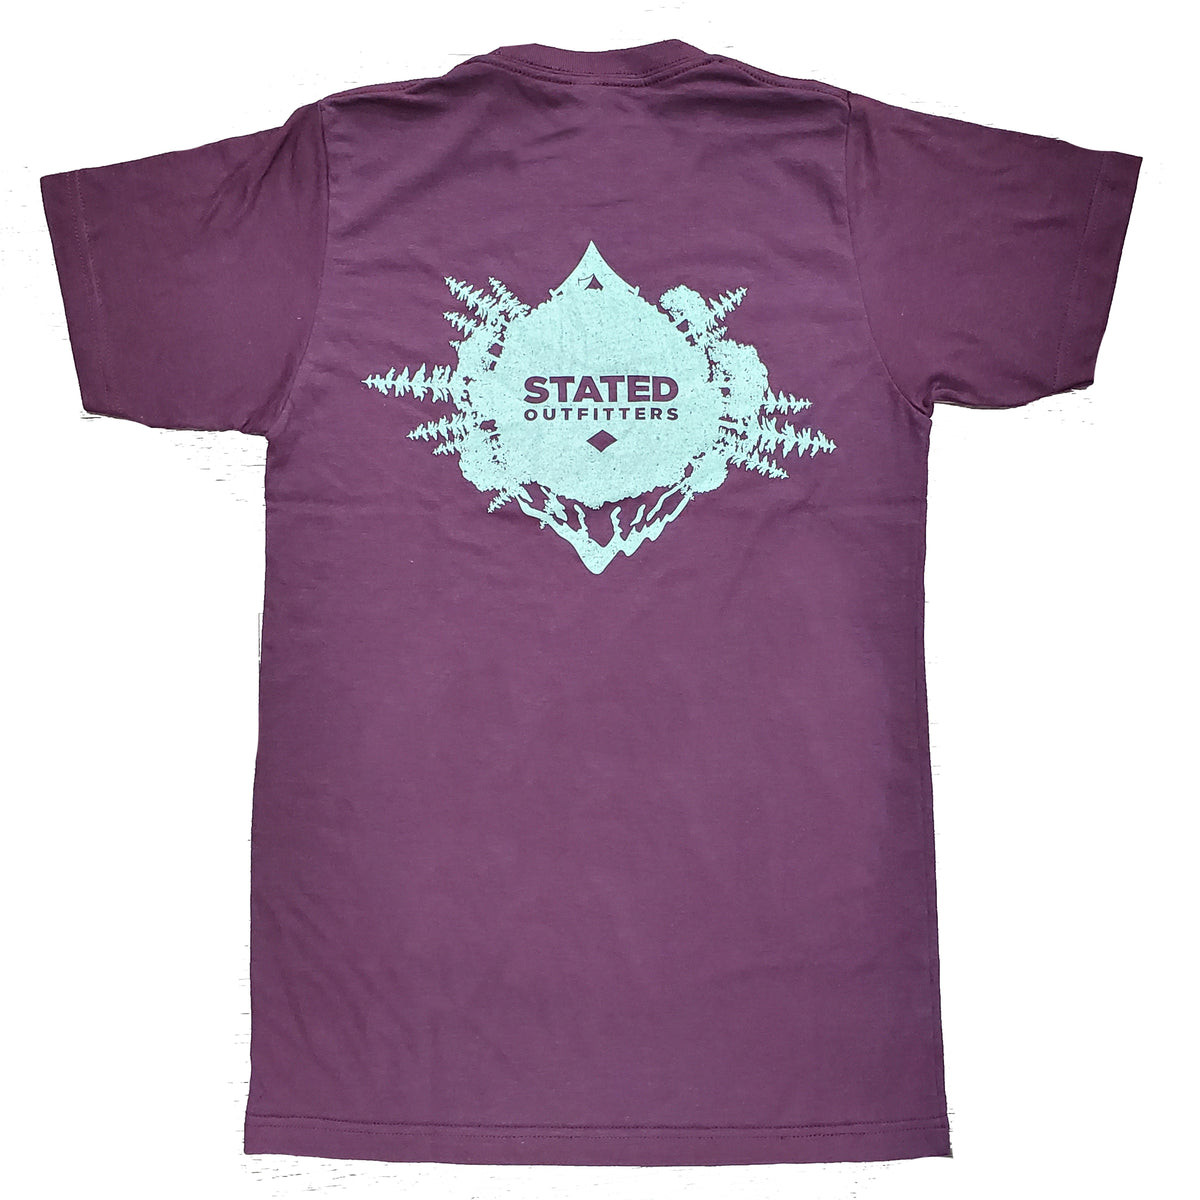 Stated Outfitters Camp the World Tee